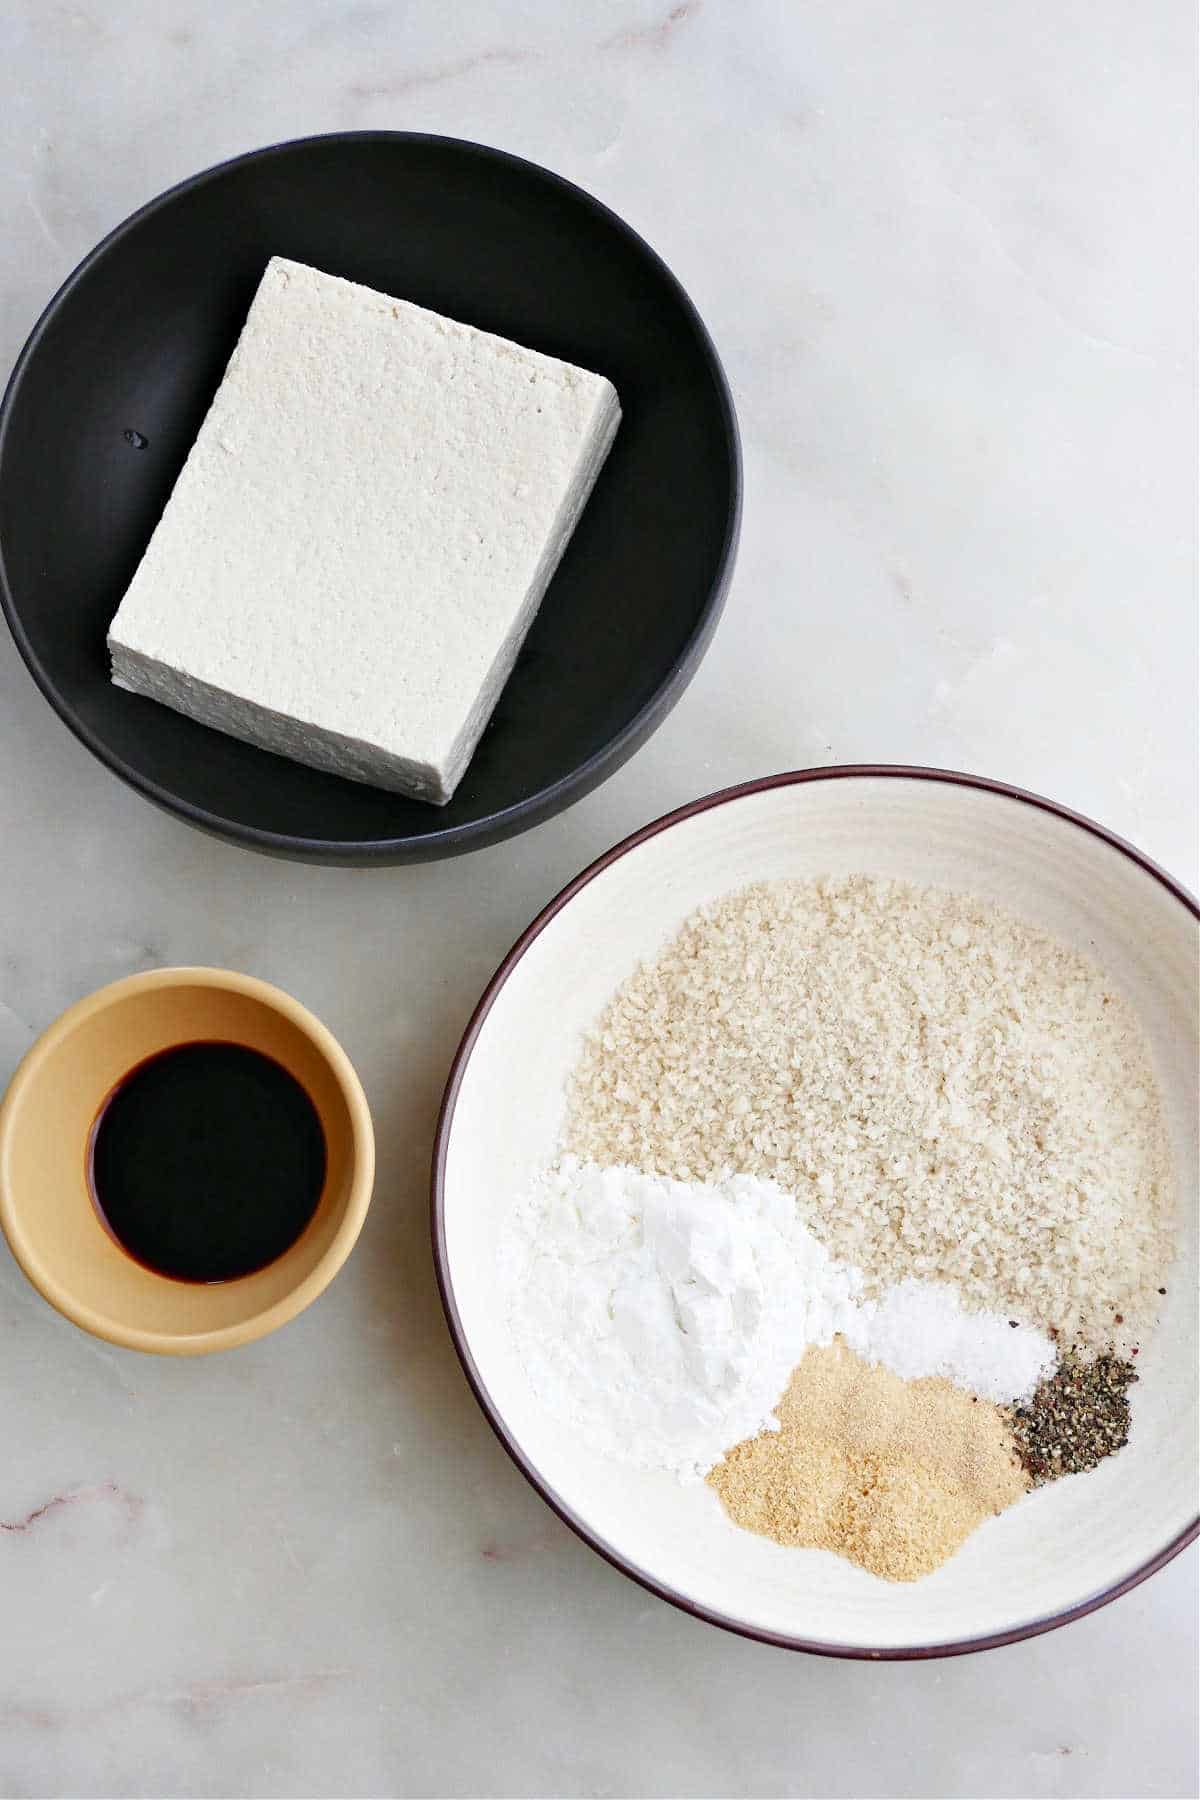 a block of tofu in a bowl next to bowls with breading ingredients